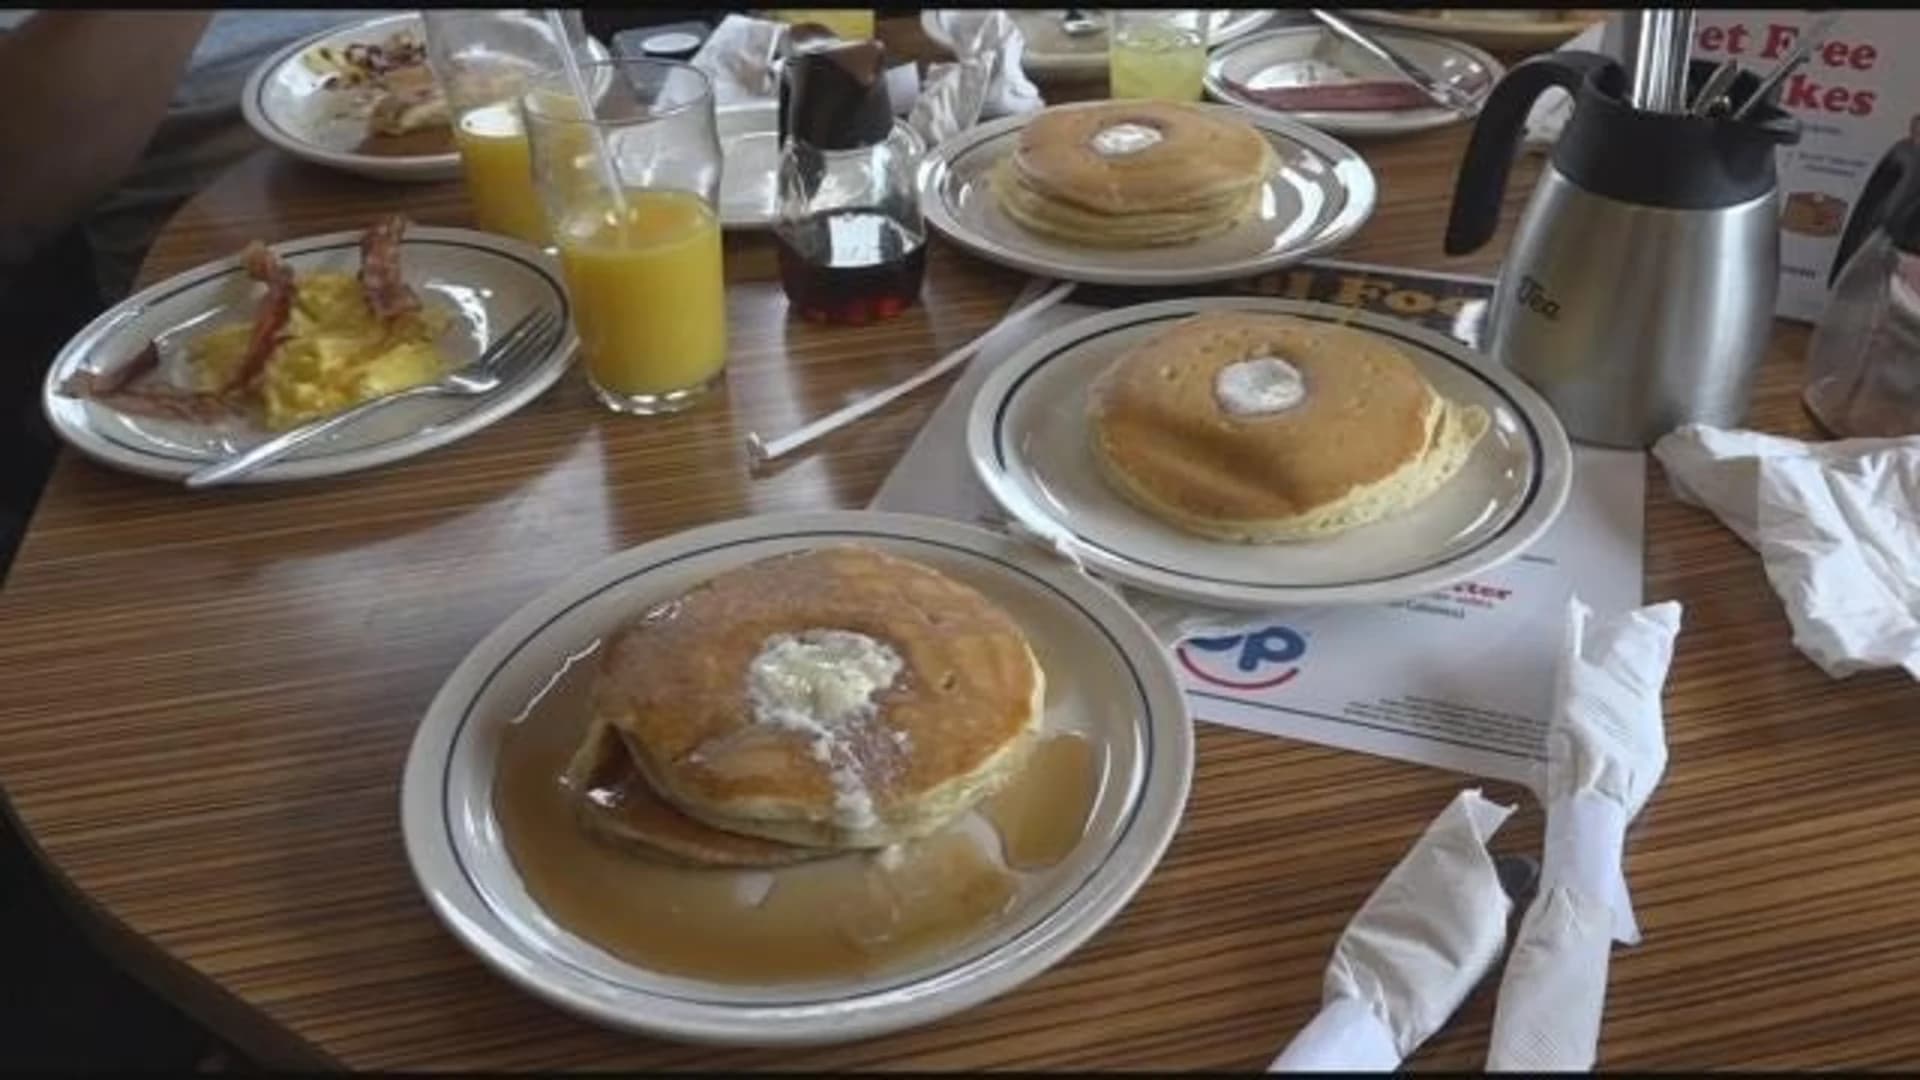 IHOP hopes to raise $4M for sick kids during Free Pancake Day